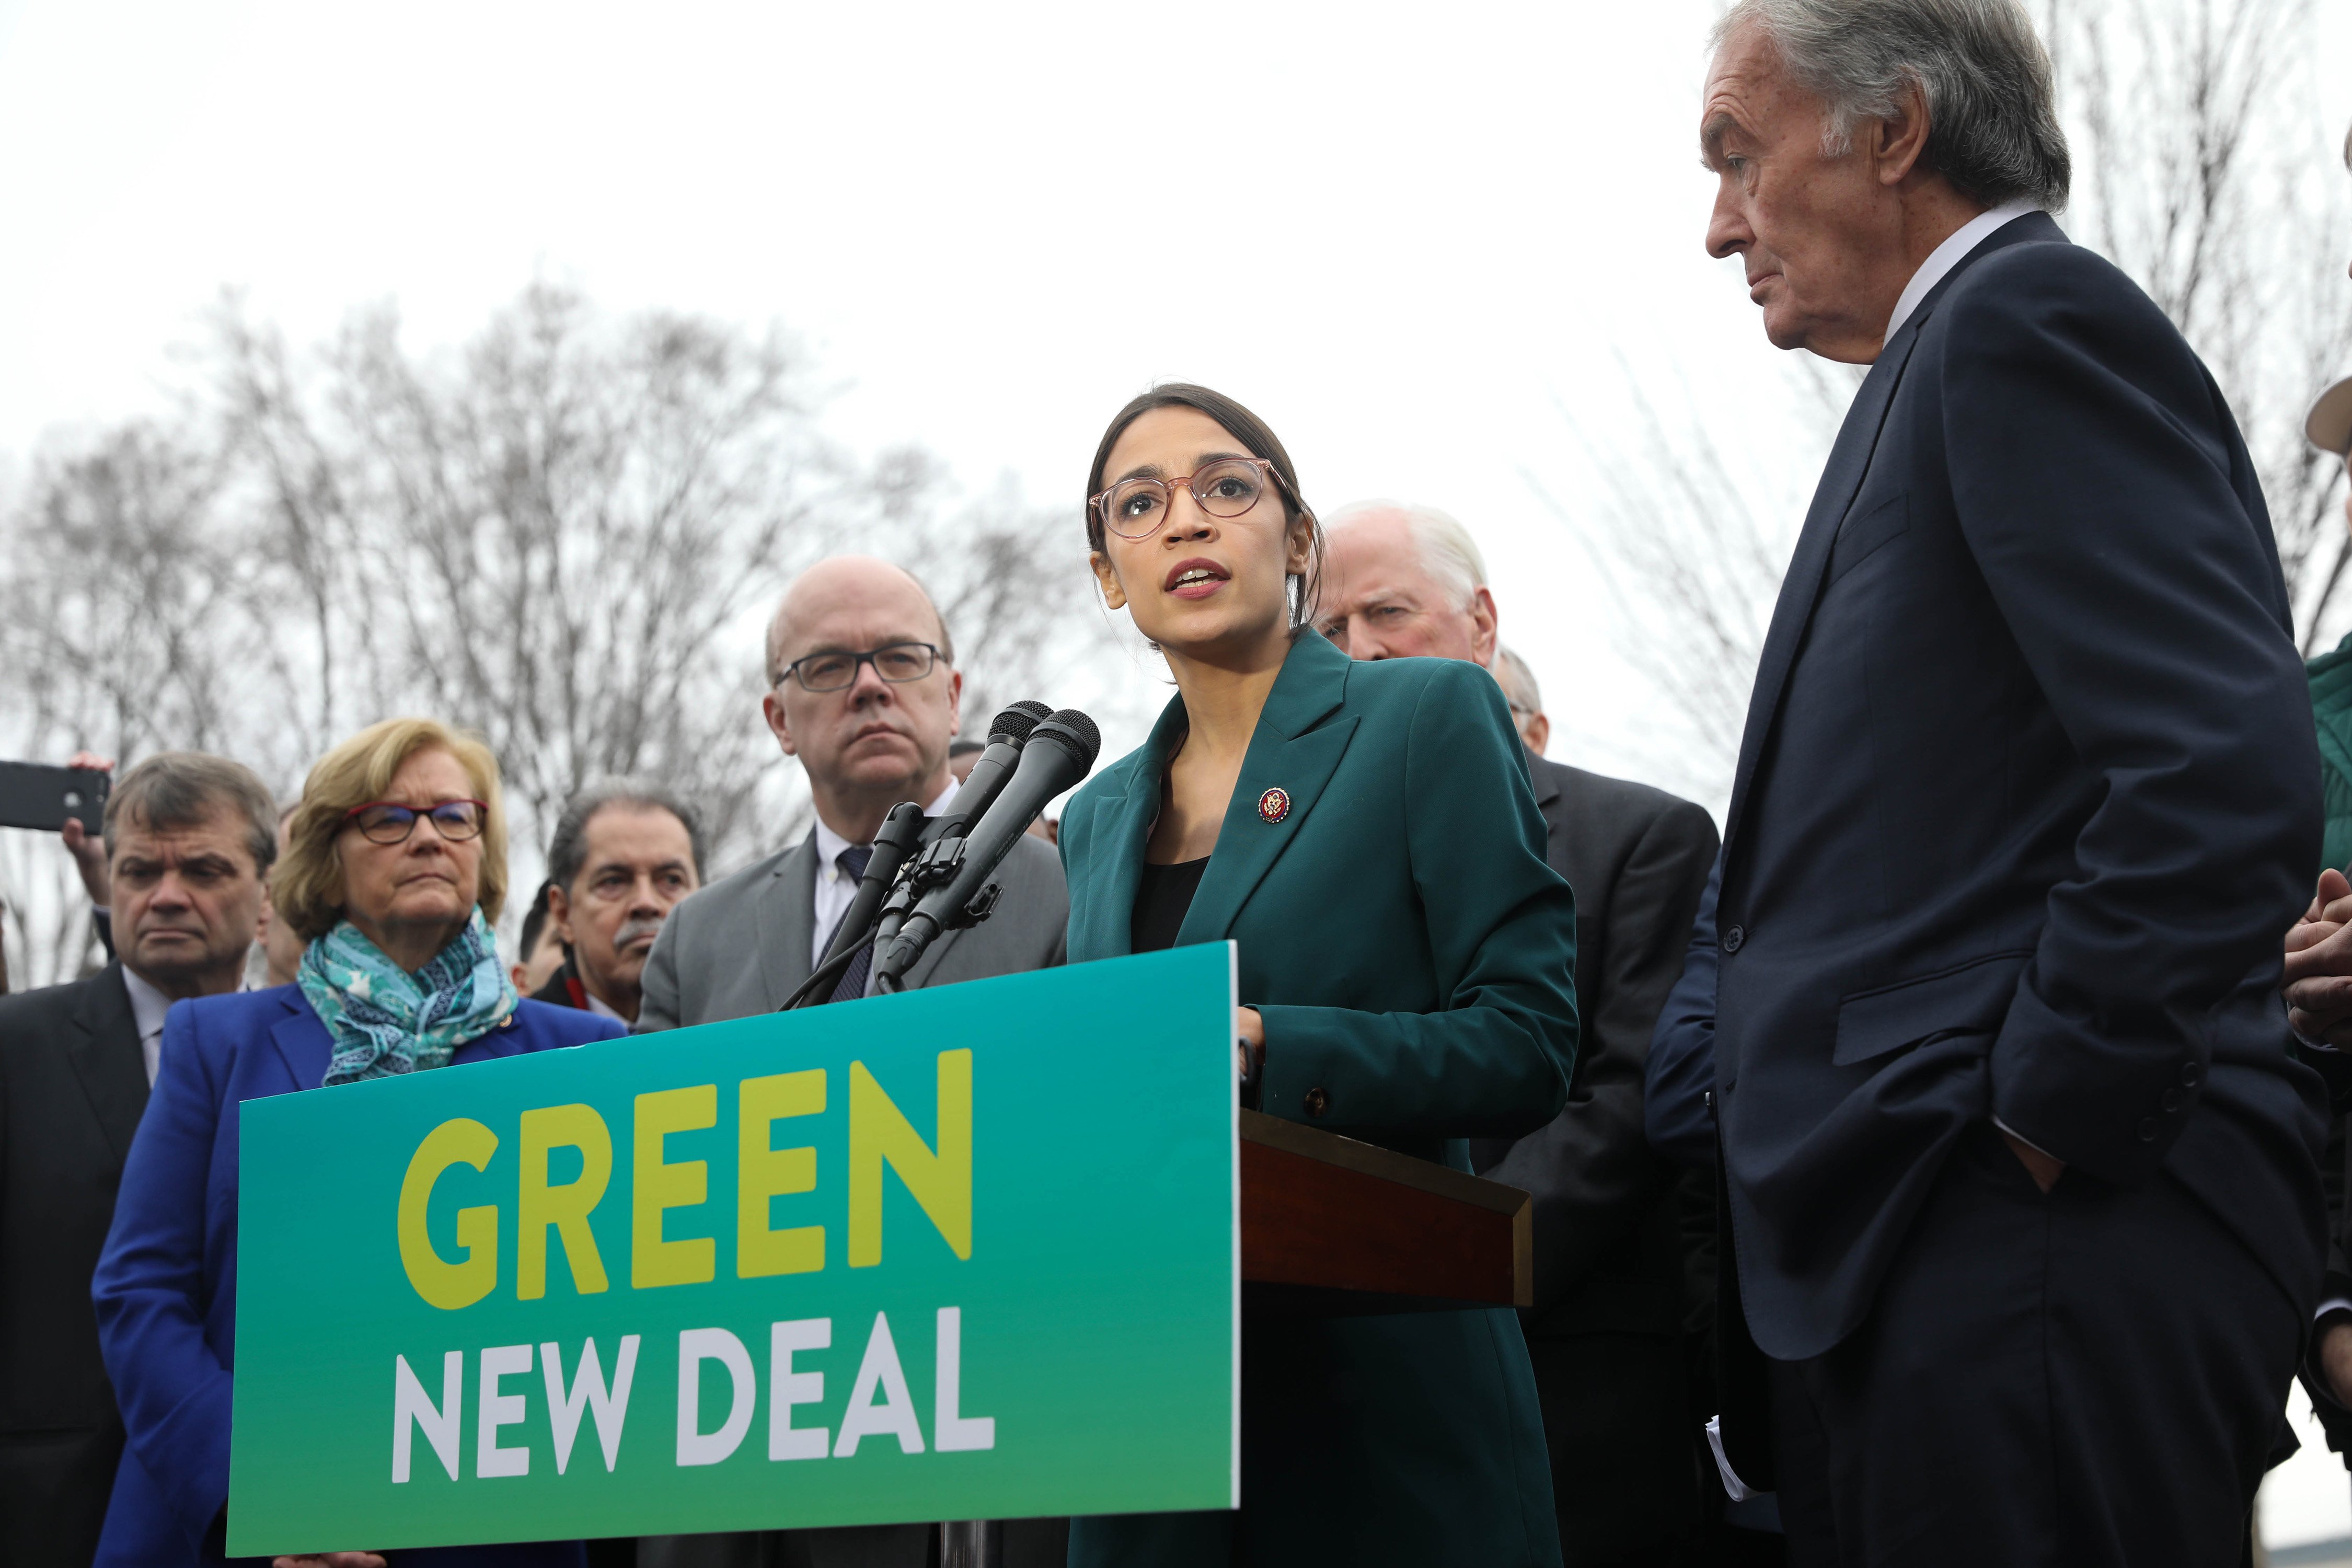 implementing a Green New Deal will be outrageously expensive and enormously disruptive, but given the significantly-higher-than-cheeseburger stakes, we can’t afford not to.